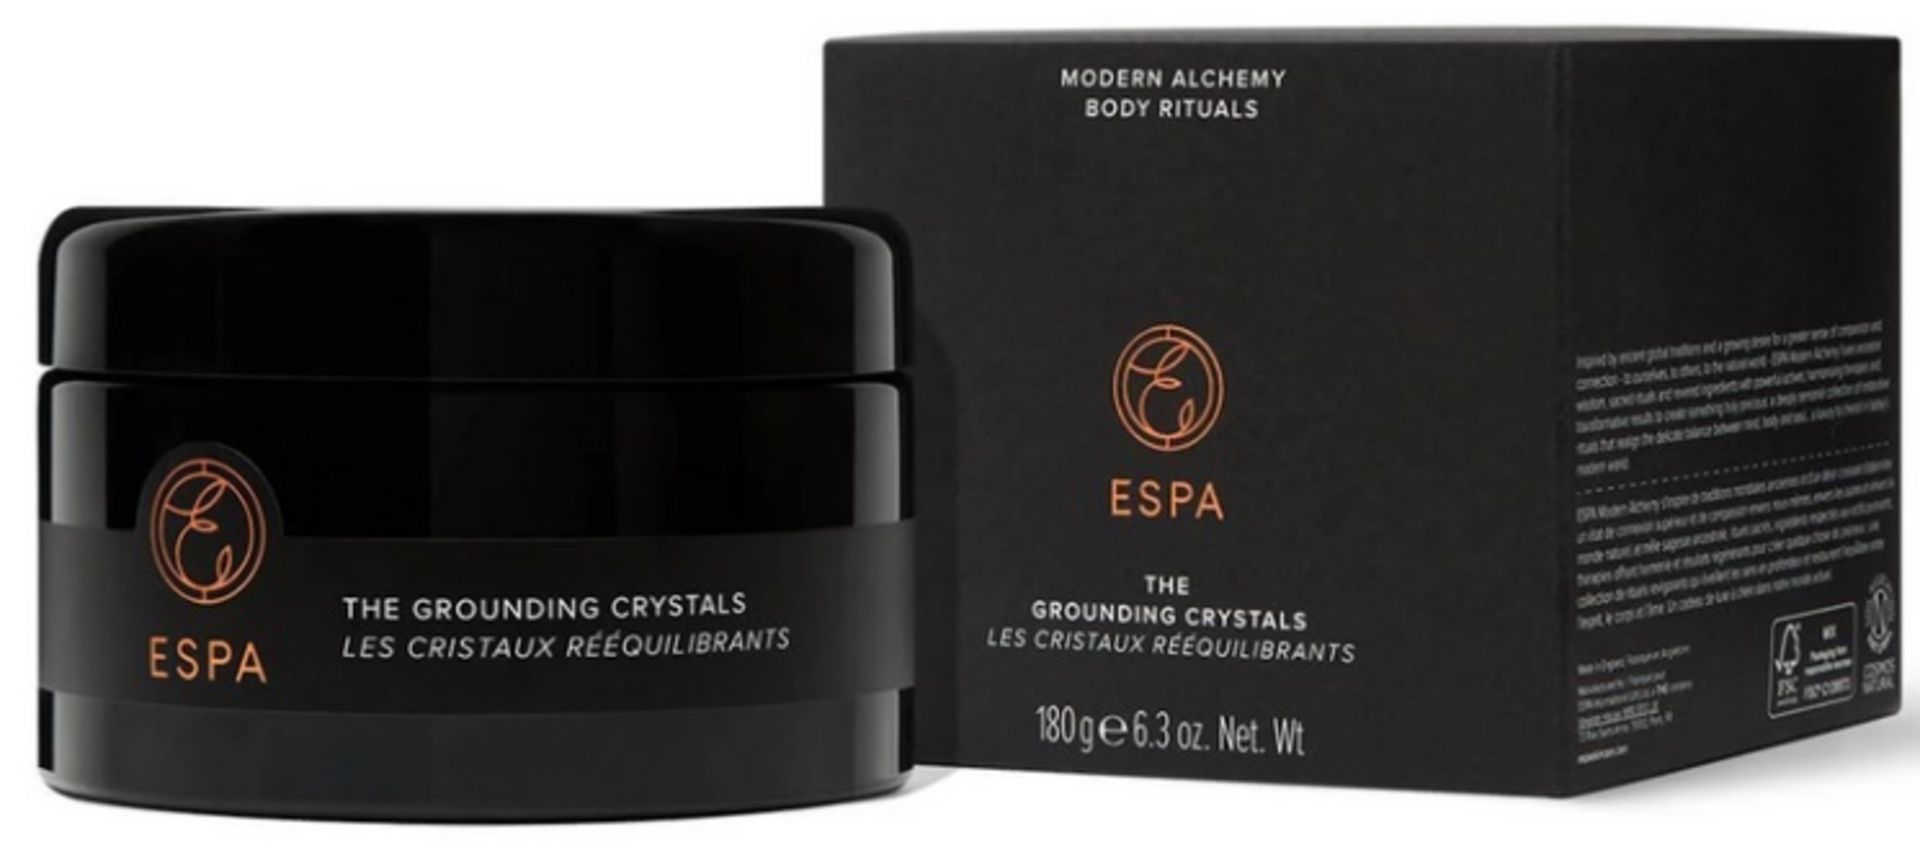 10x NEW & BOXED ESPA The Grounding Crystals 180g. RRP £35 each. (R12-14). Create your own bathing